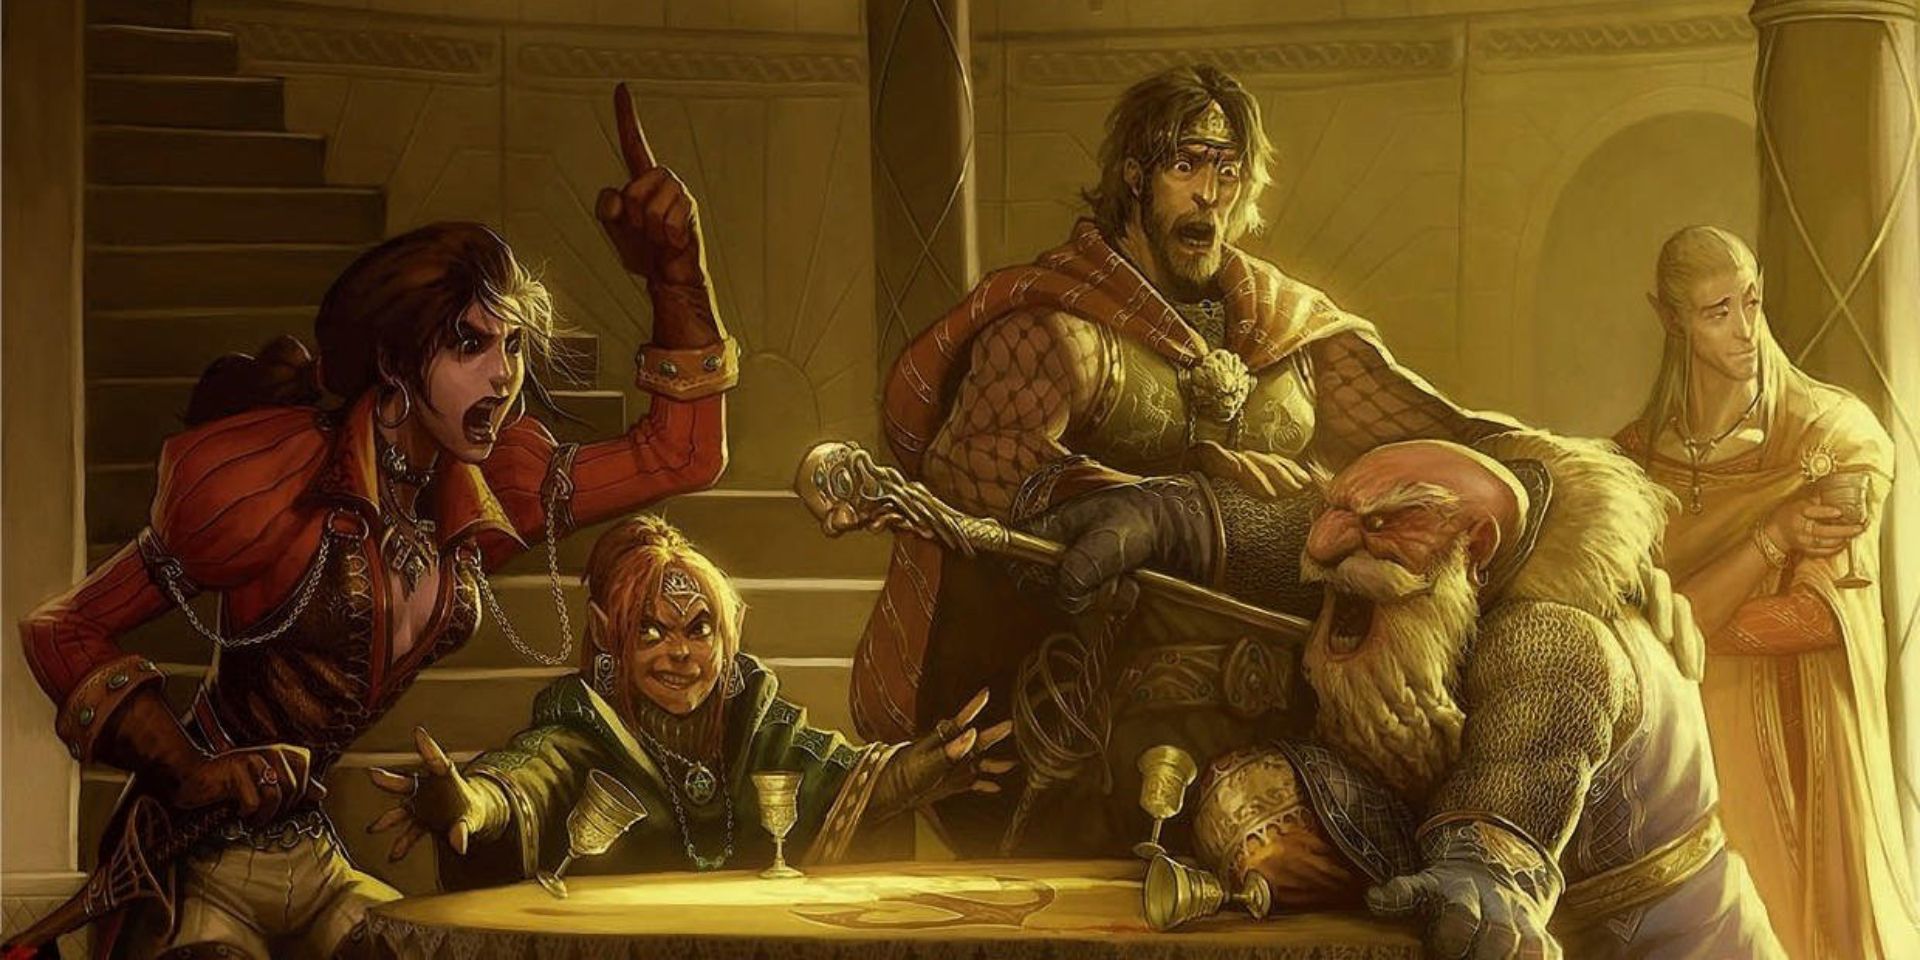 A D&D party in the middle of an argument.